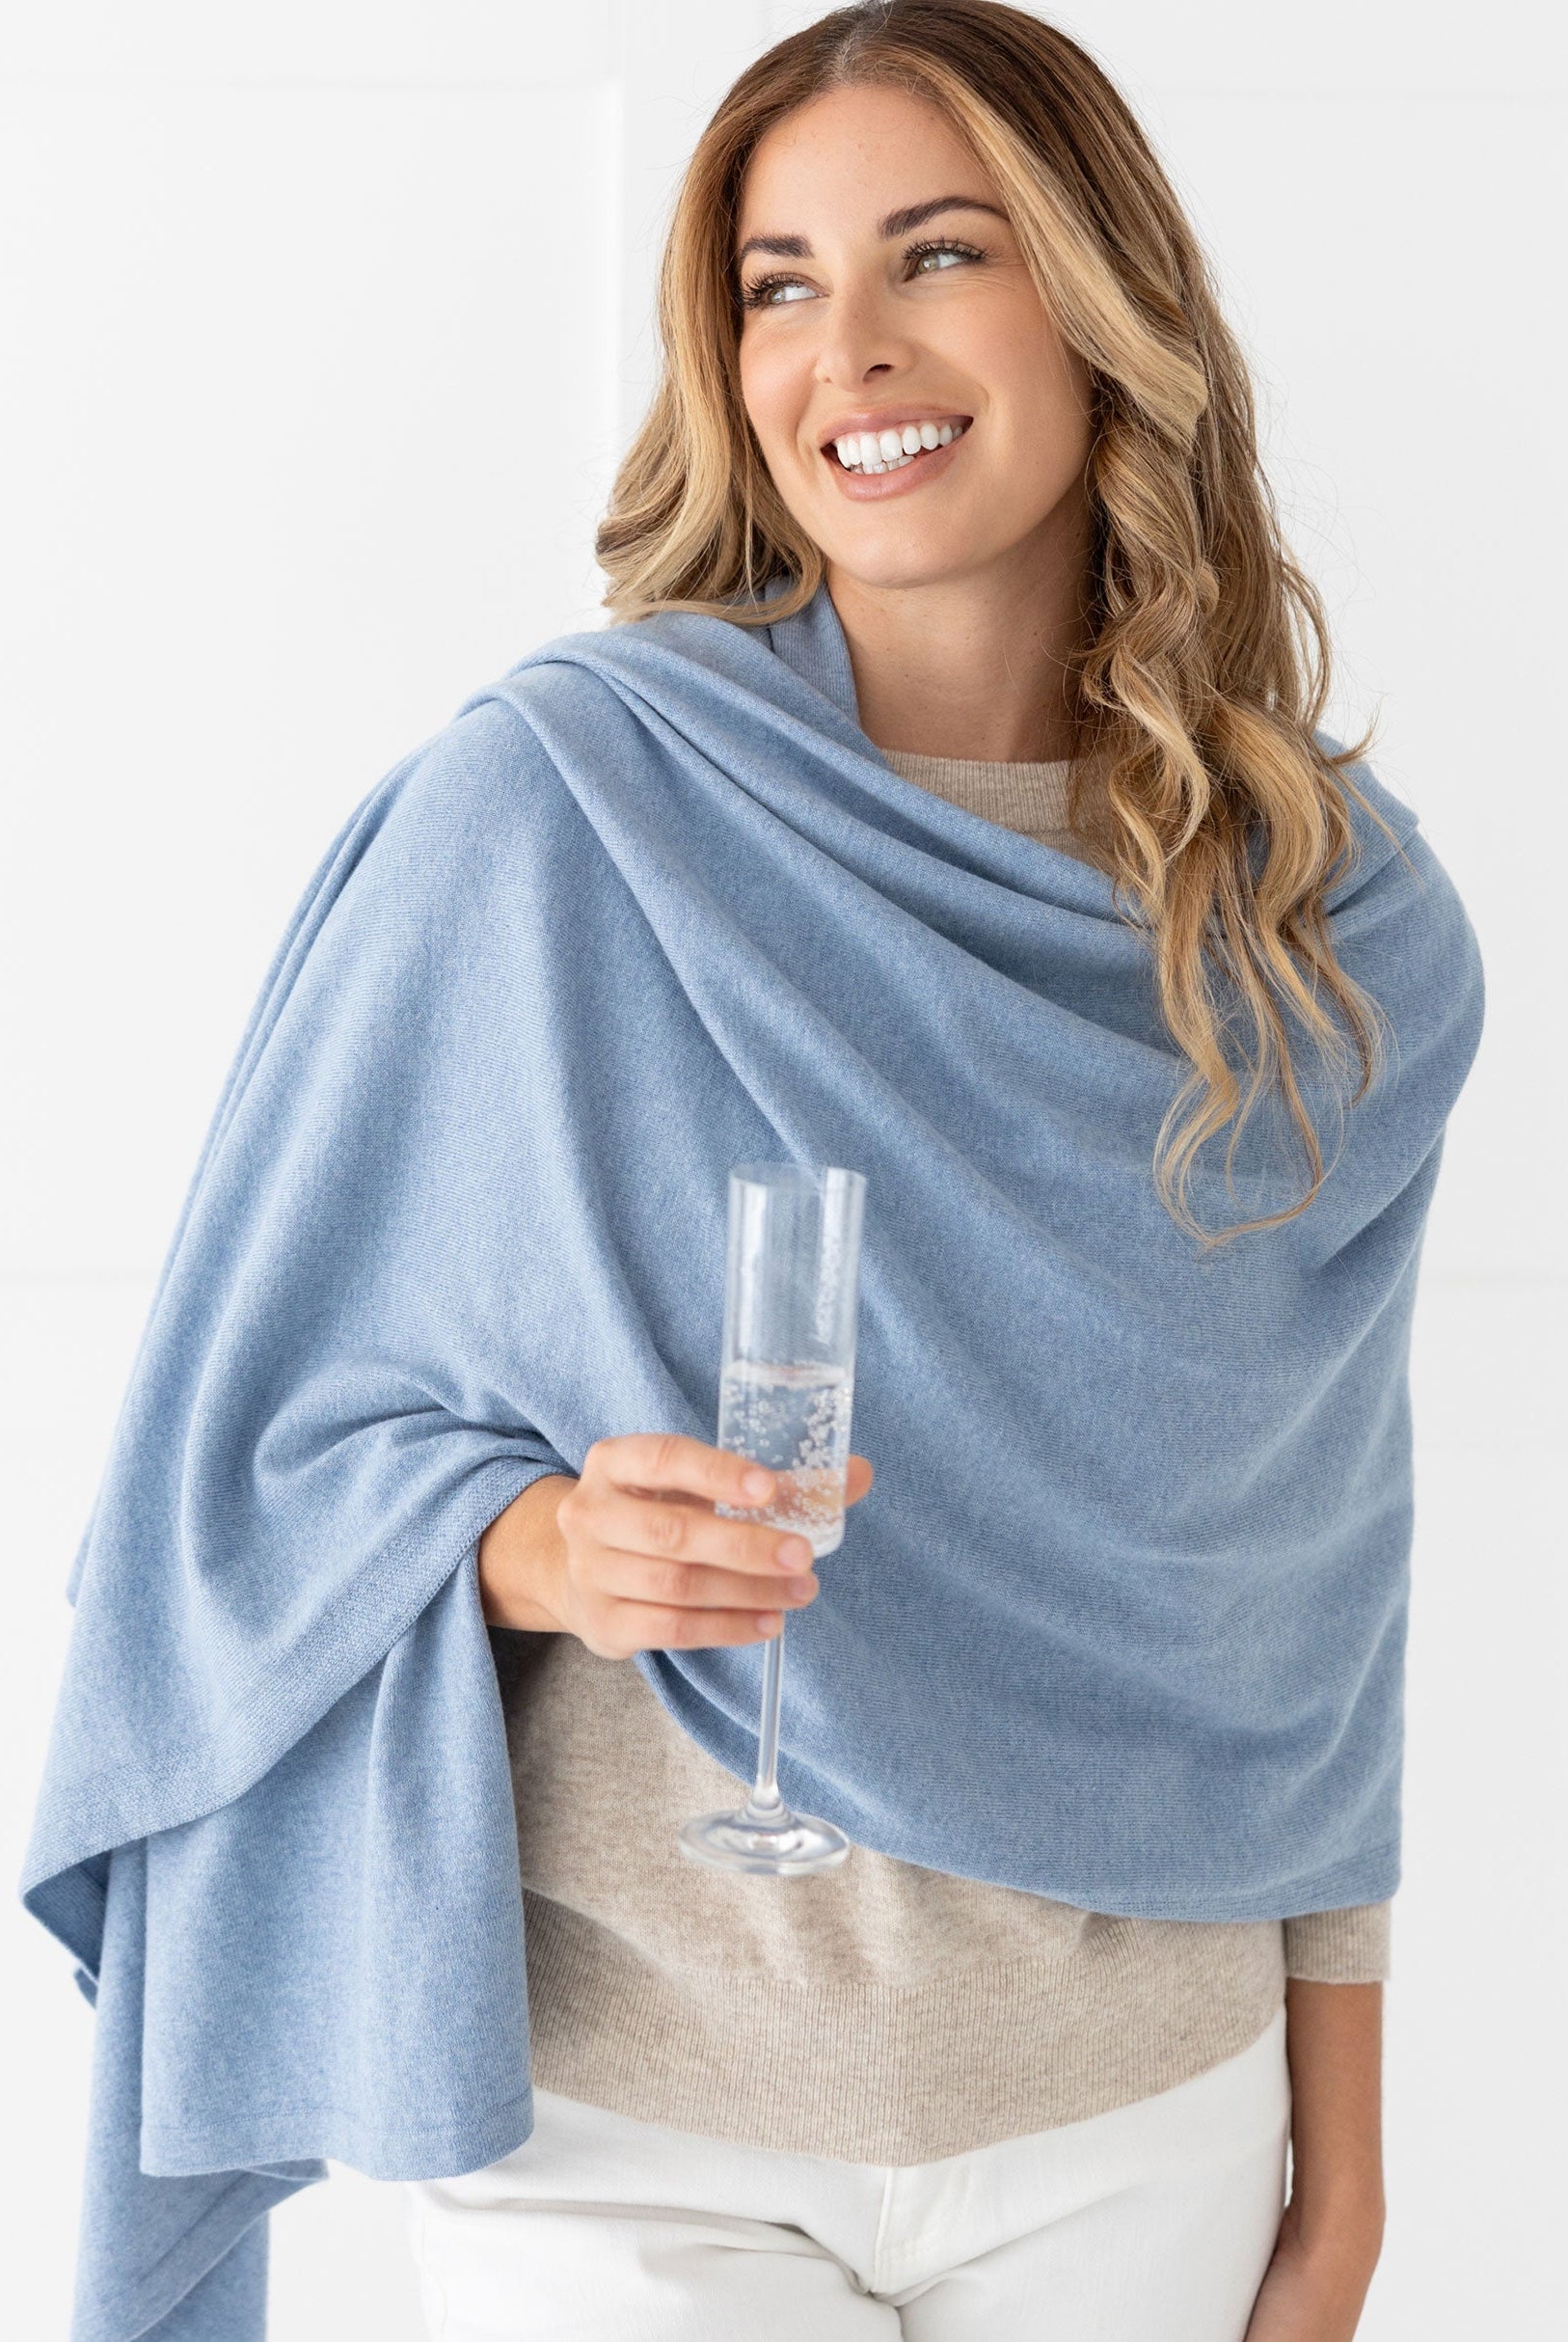 Woman wearing the Cashmere Cotton Luxe Travel Scarf in Horizon Blue which is a light blue scarf, with champagne glass in hand